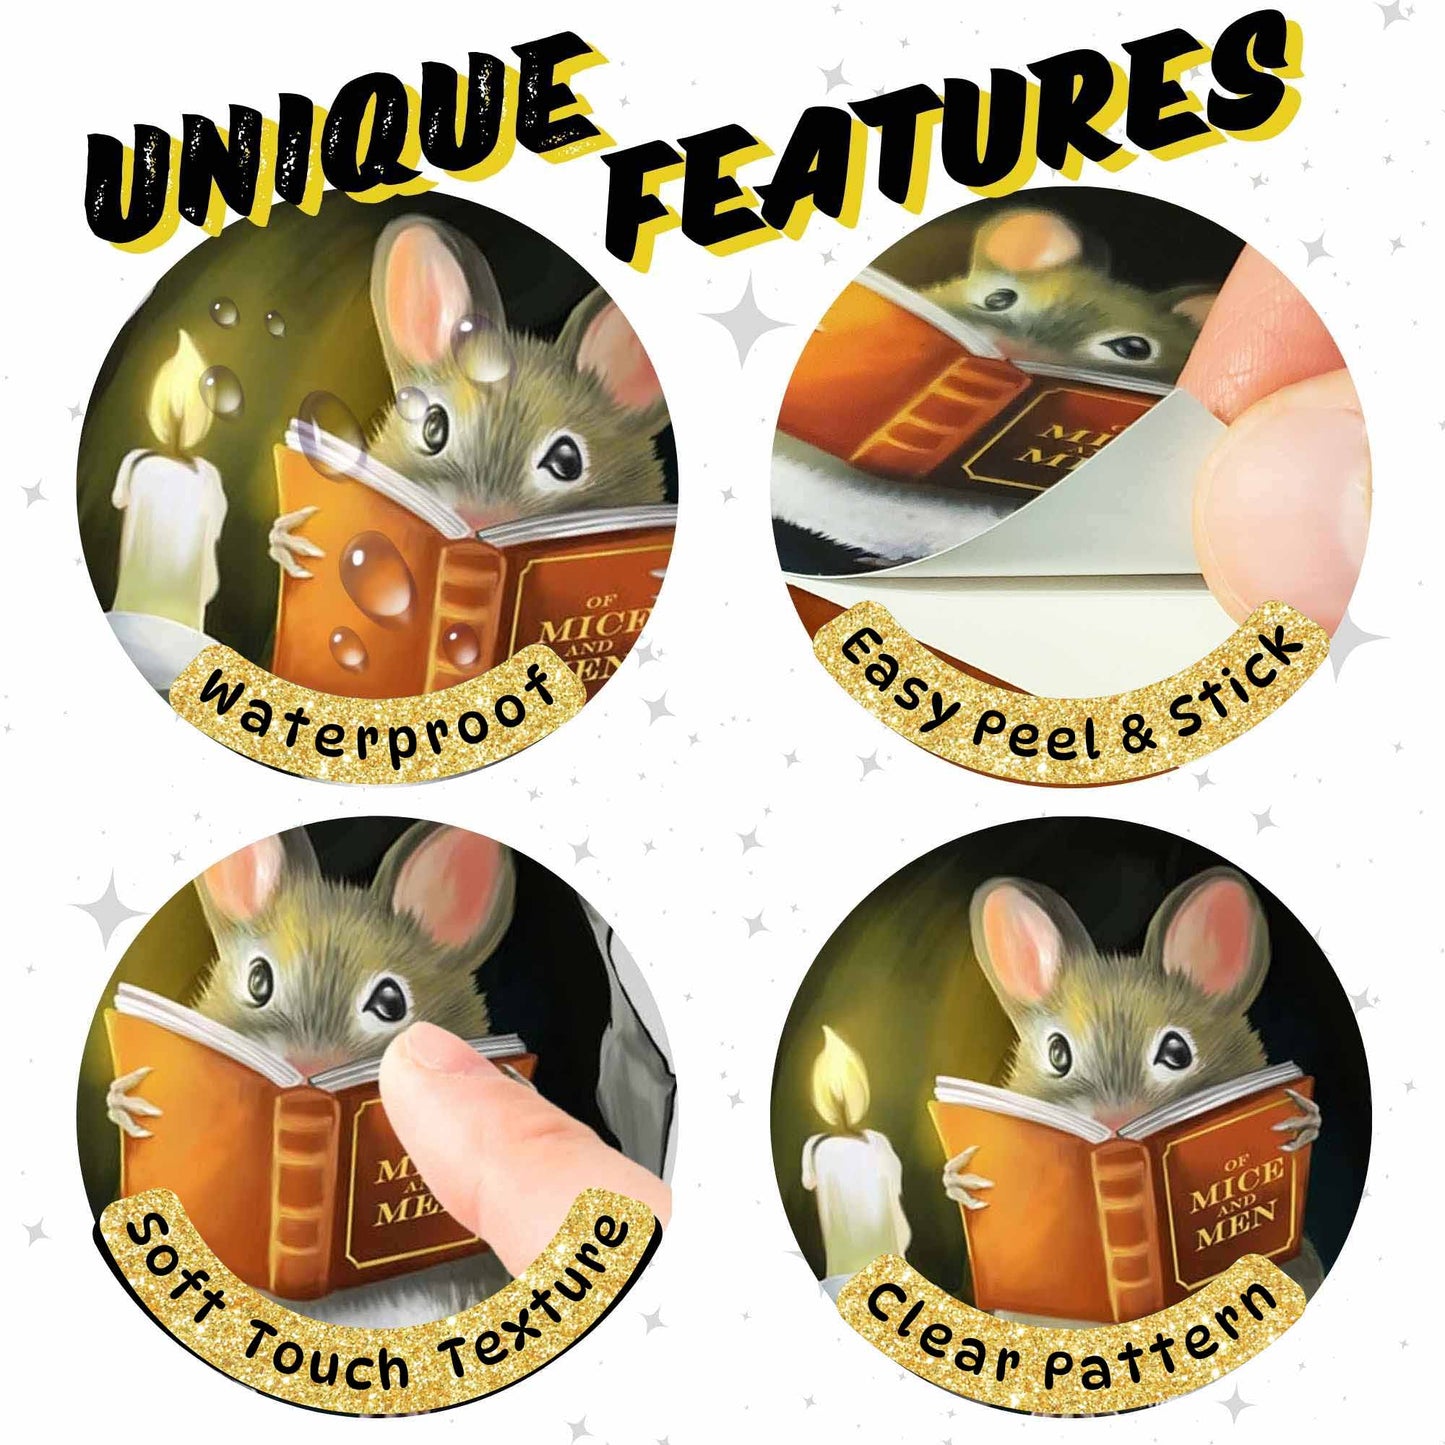 Mouse Reading Book 3D Wall Sticker Decal - Micesterpiece